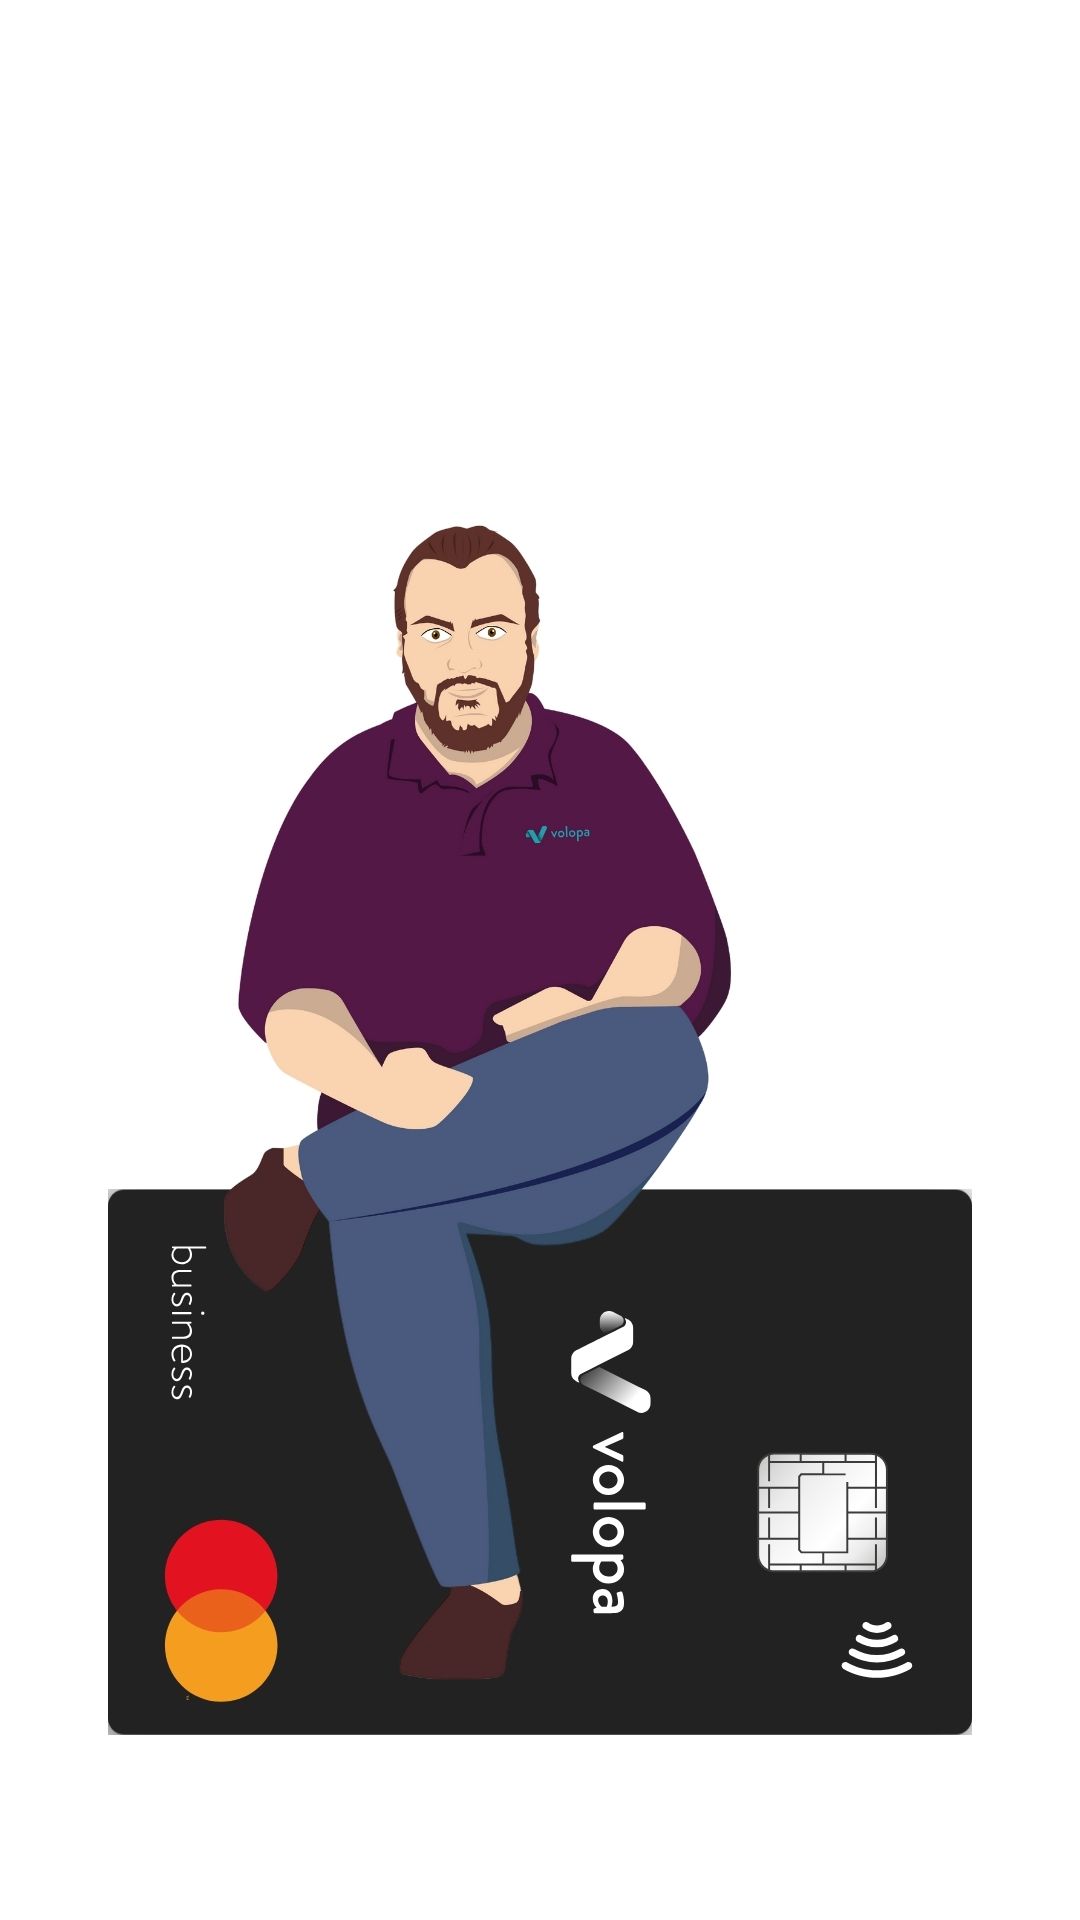 Animation image of seated character and Volopa business prepaid expense card